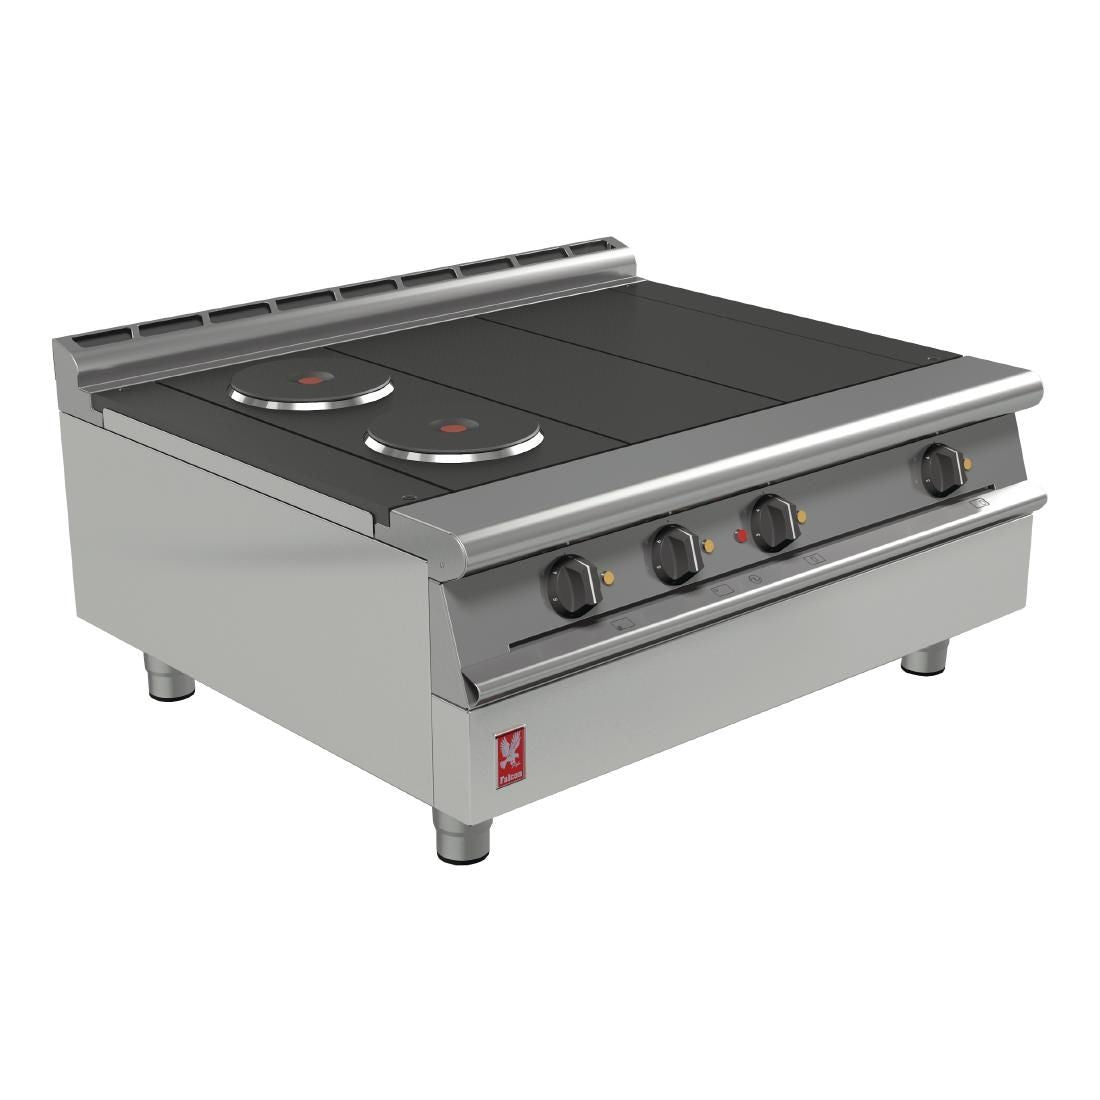 Falcon Dominator Plus 4 Hotplate Boiling Top E3121 JD Catering Equipment Solutions Ltd